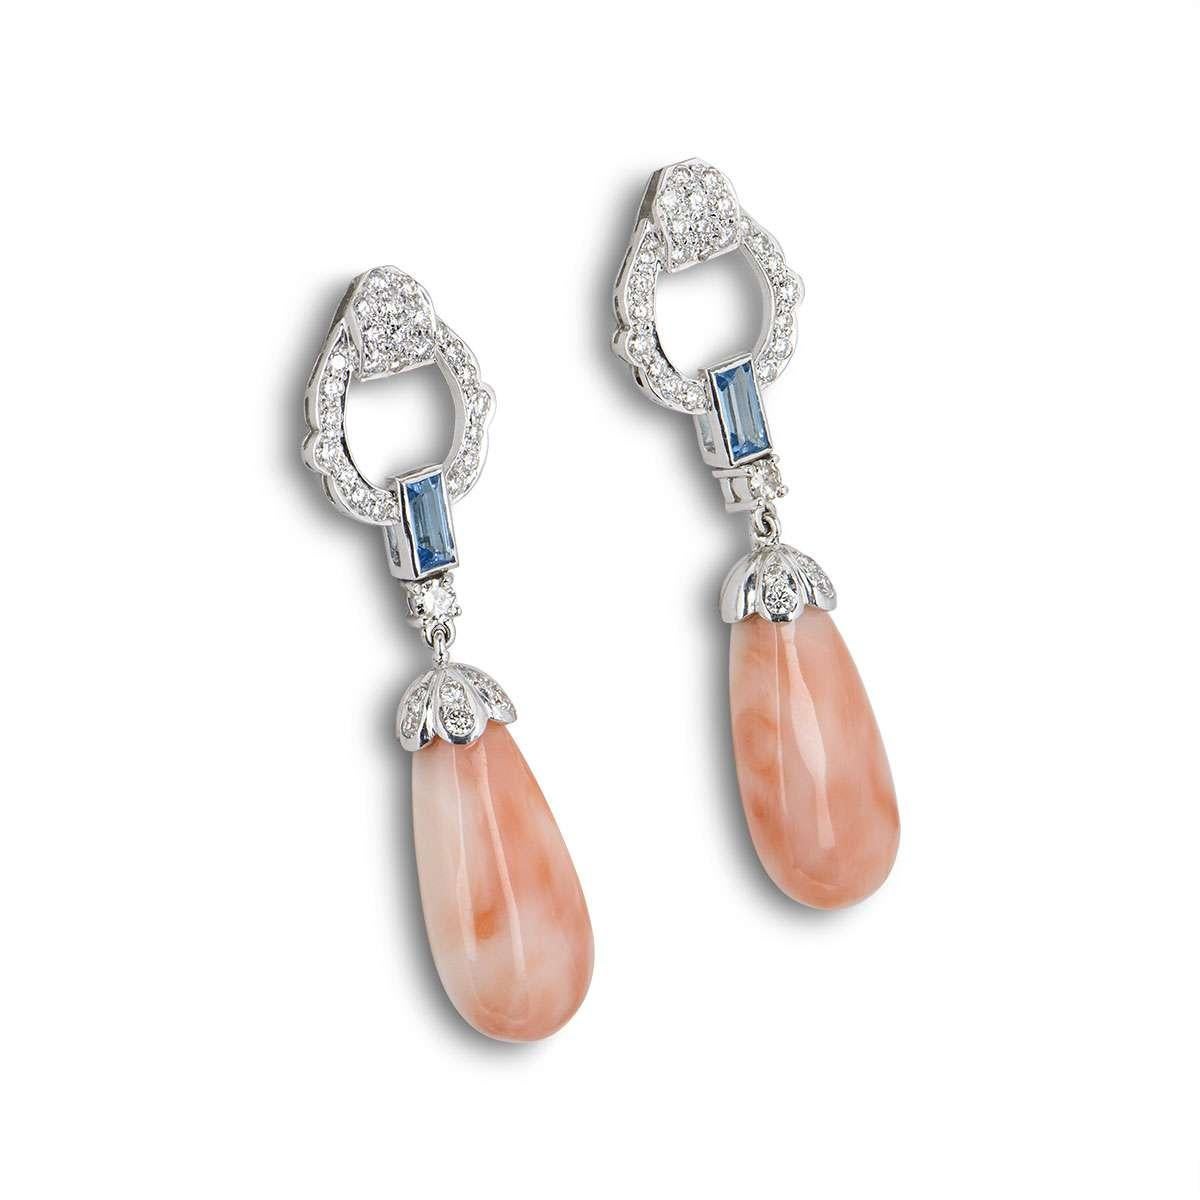 A lovely pair of 18k white gold drop earrings. The earrings feature pave set round brilliant cut diamonds with a single baguette cut blue topaz, suspending a large piece of coral in a teardrop shape. The diamonds have a total weight of 1.71ct, the